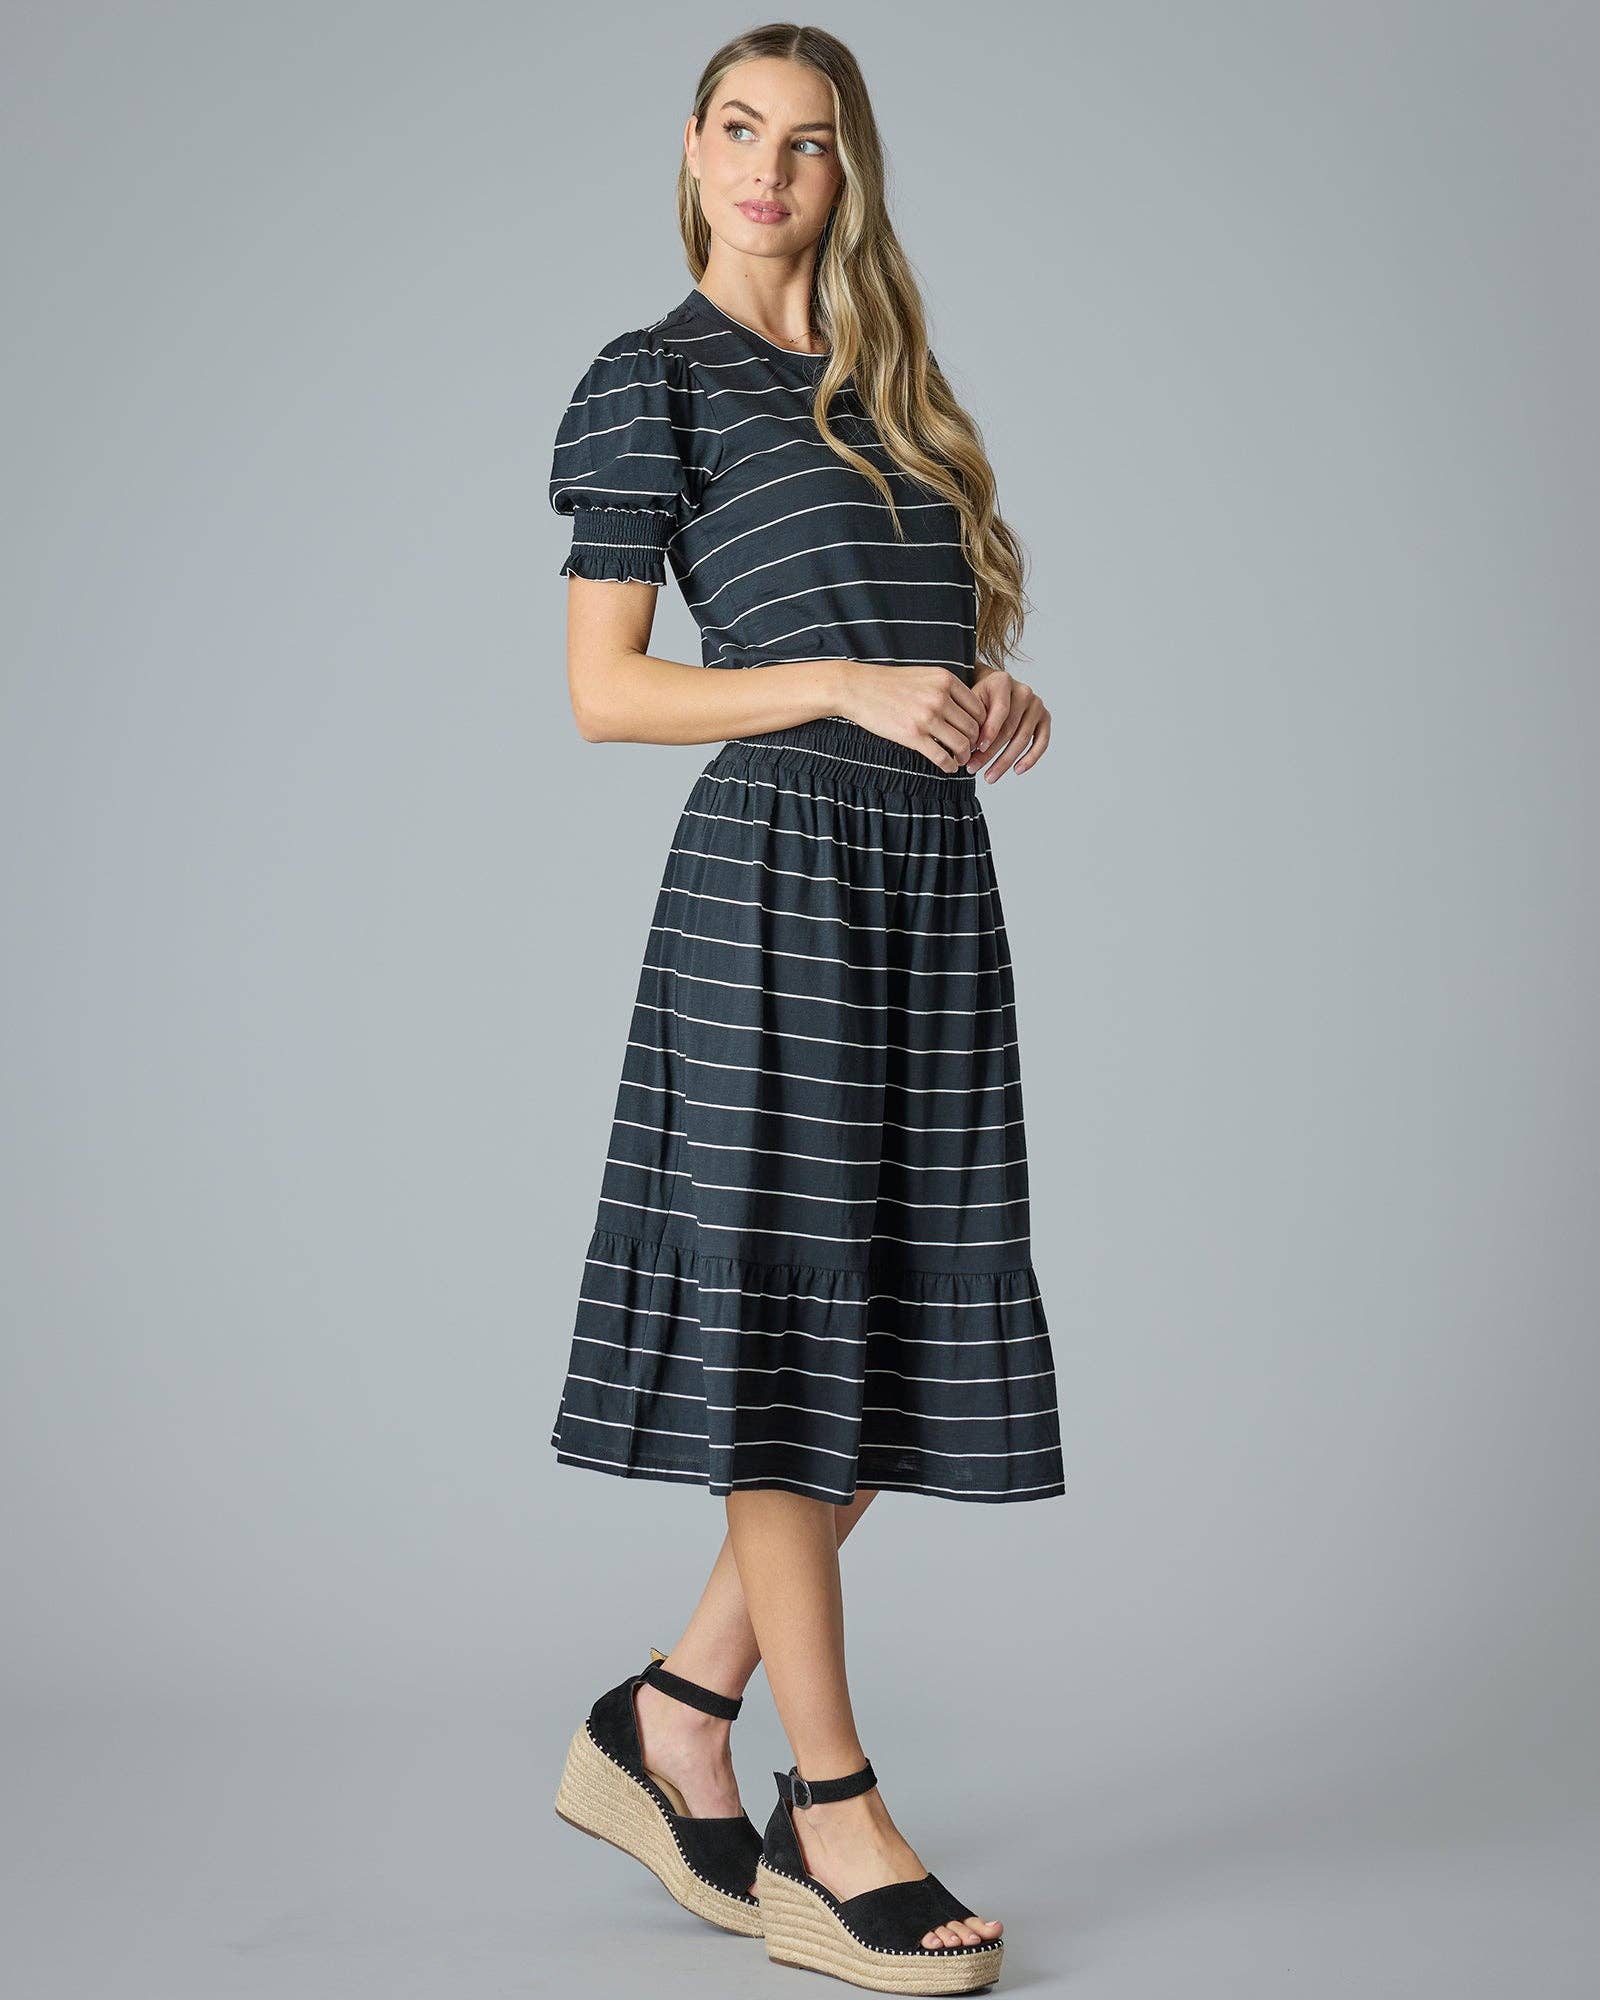 Tres Belle Skirt In Black with White Stripes Spring-Summer Downeast